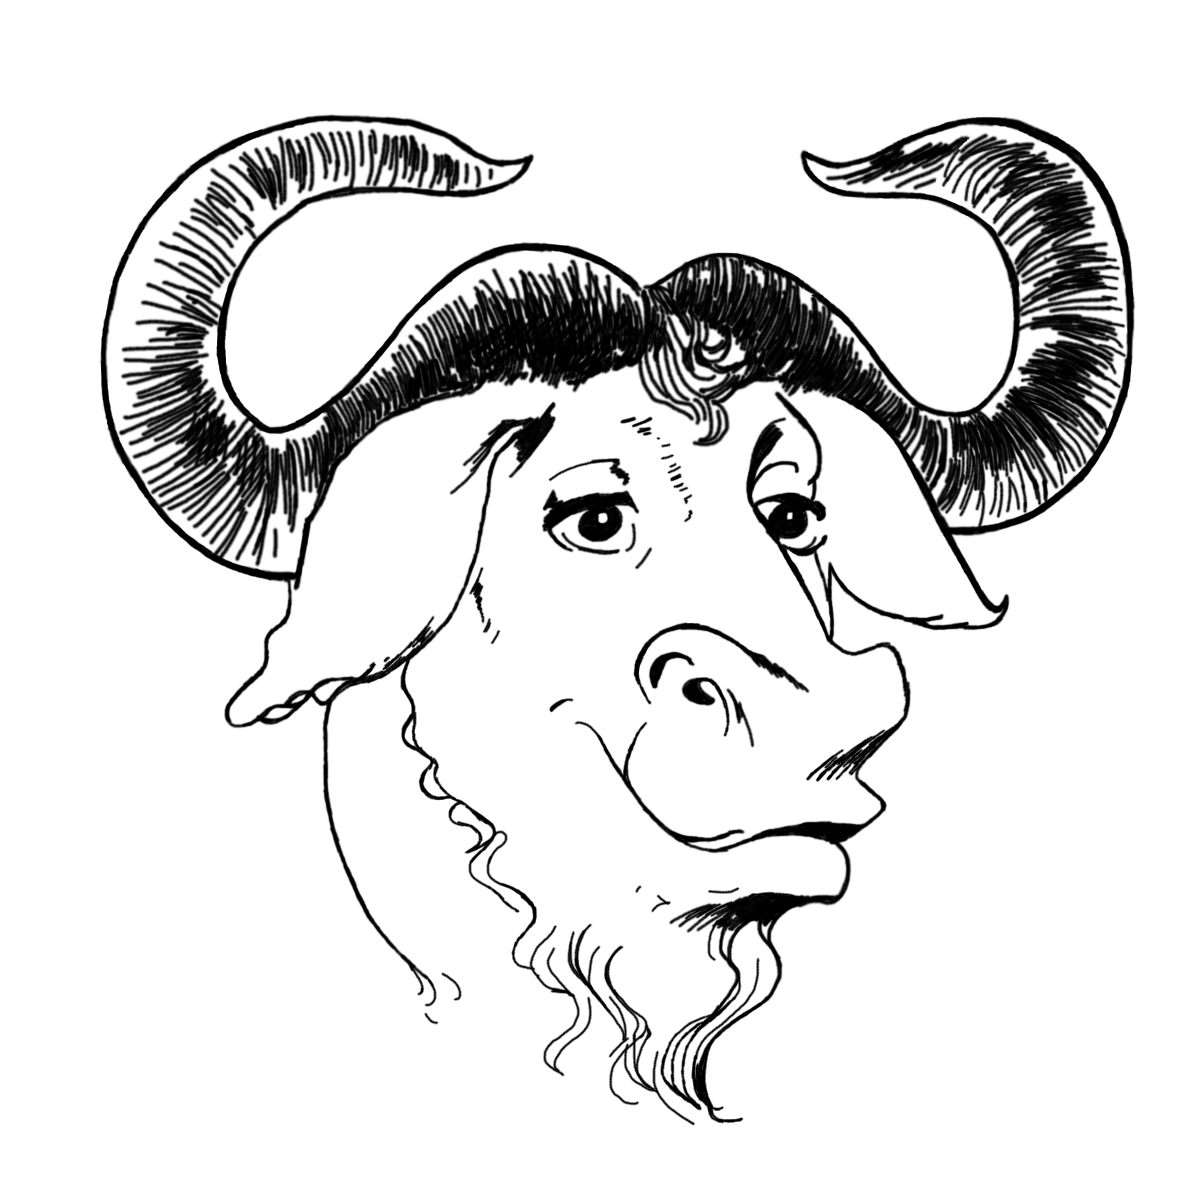 GNU Logo - history - What is the name of an animal used as a logo by the GNU ...